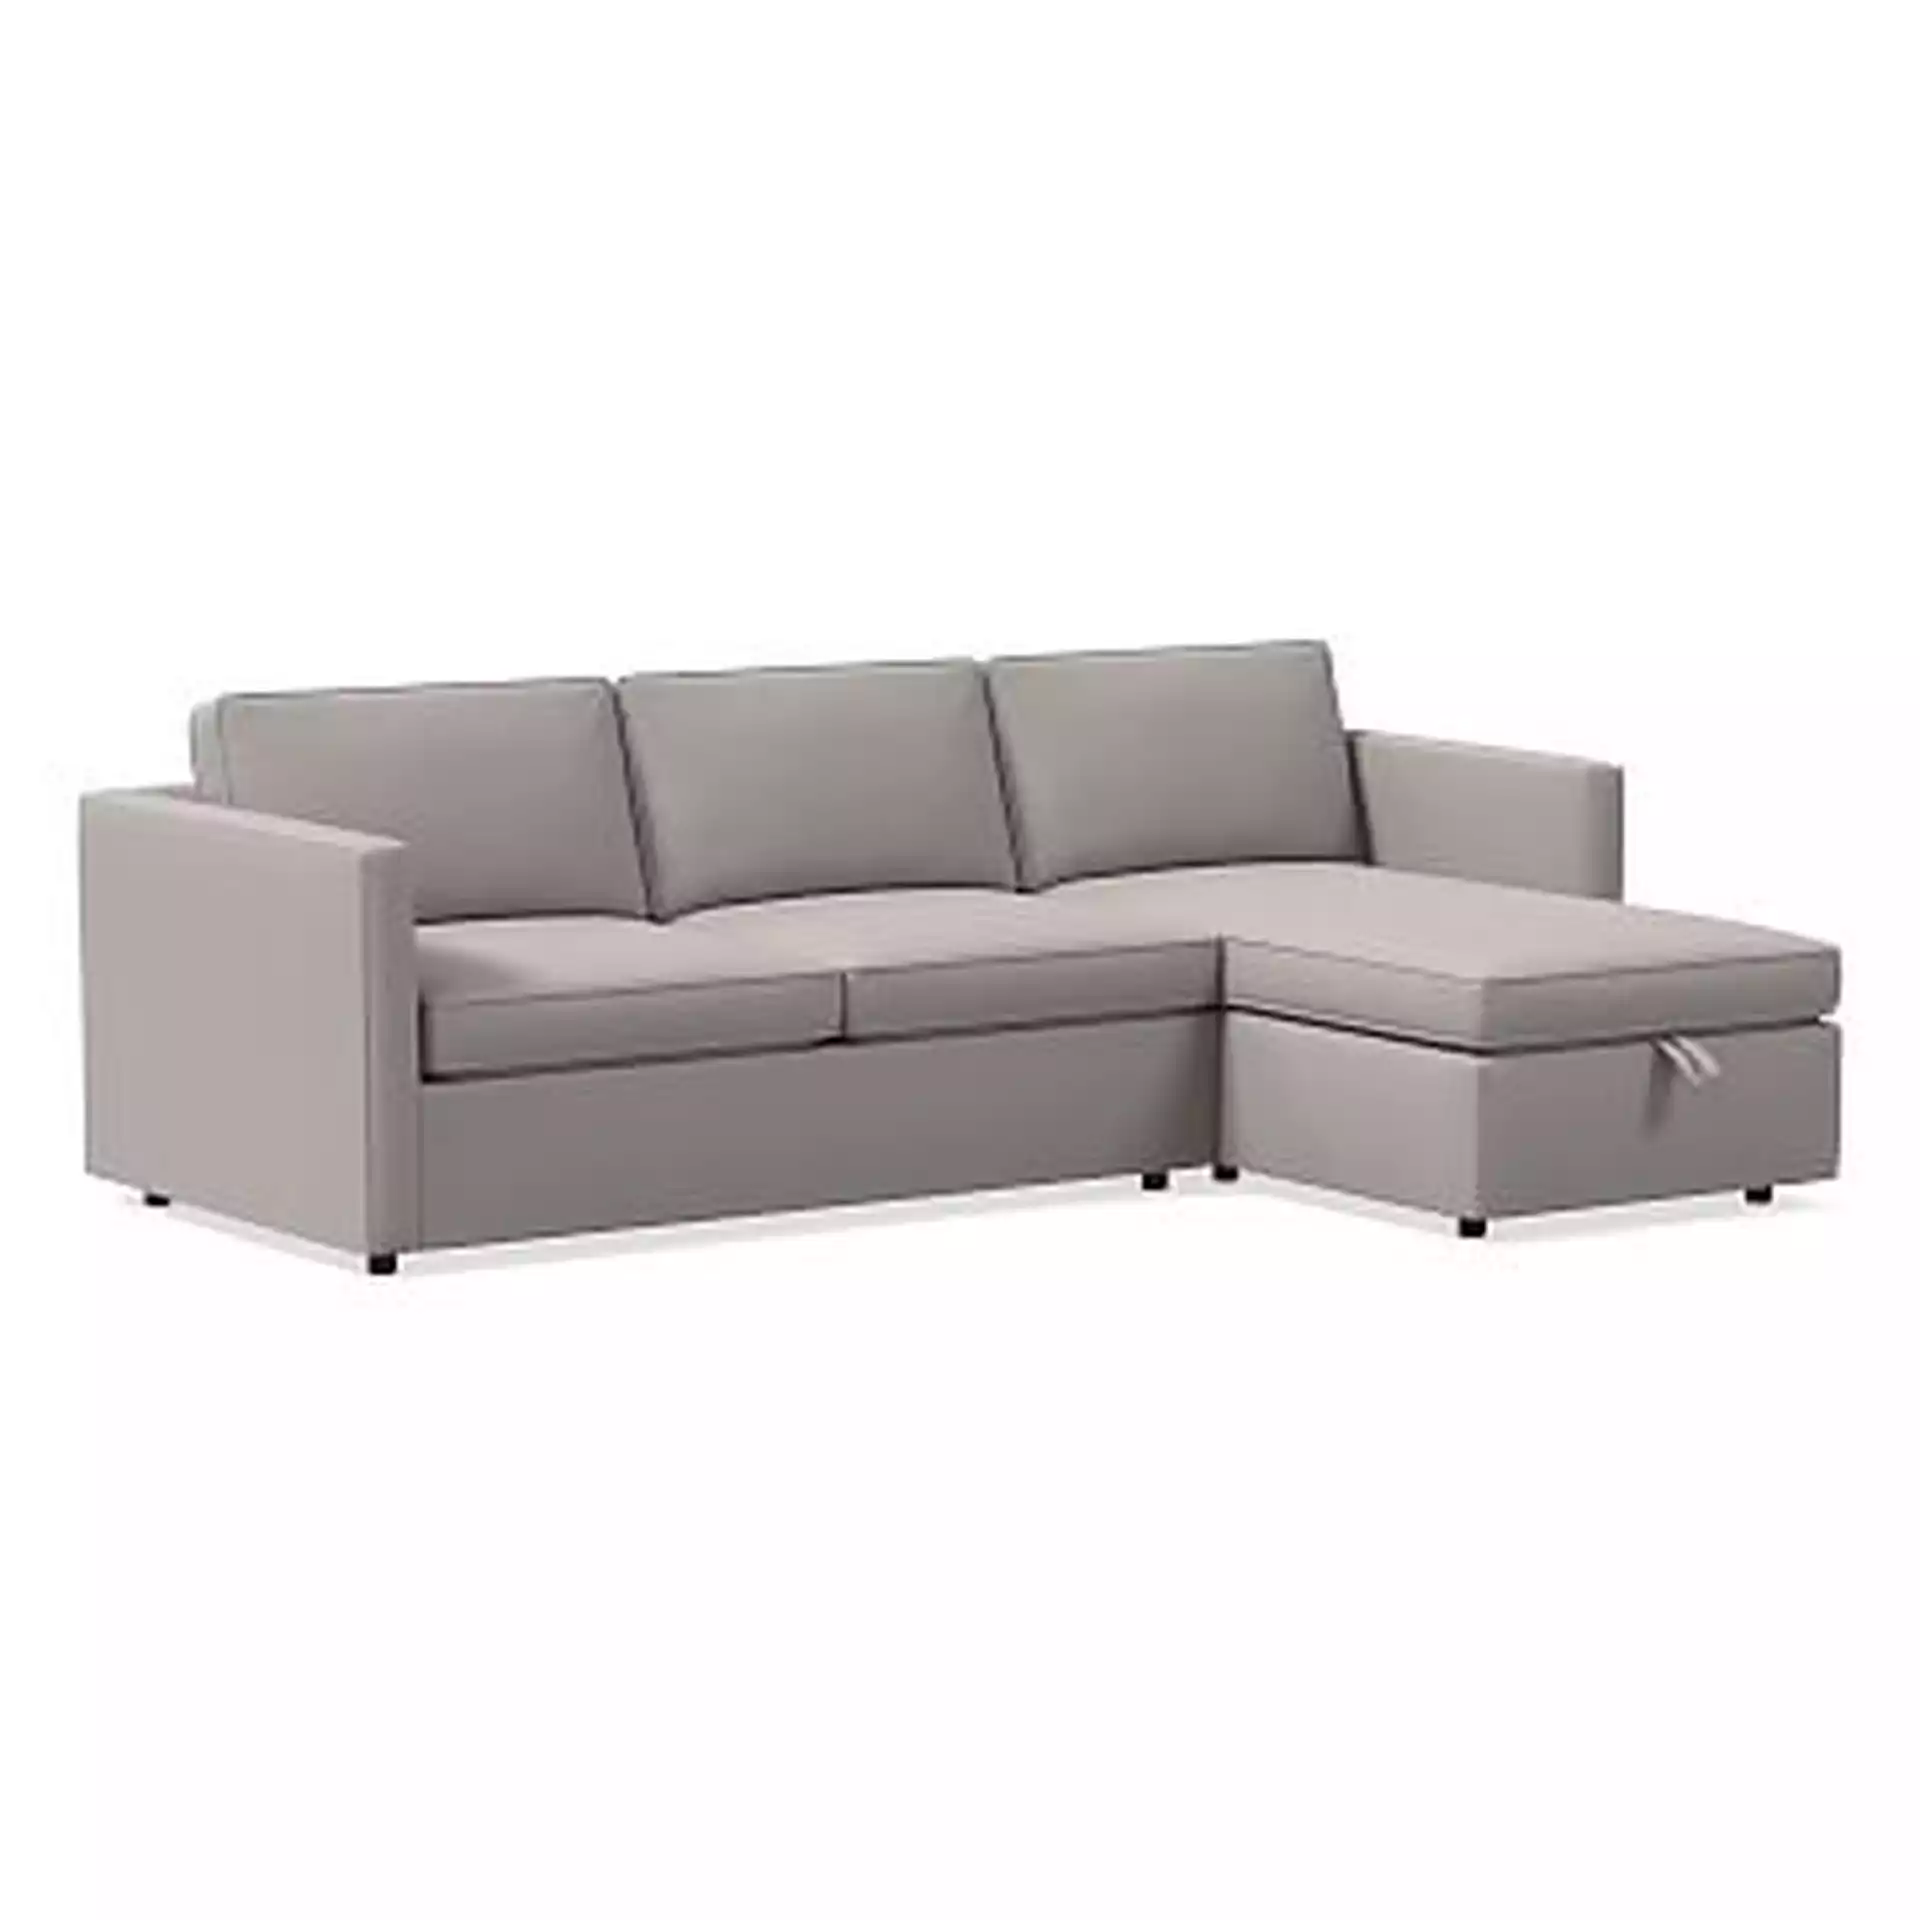 Harris Sectional Set 05: LA 65" Sofa, RA Storage Chaise, Poly , Performance Velvet, Silver, Concealed Supports